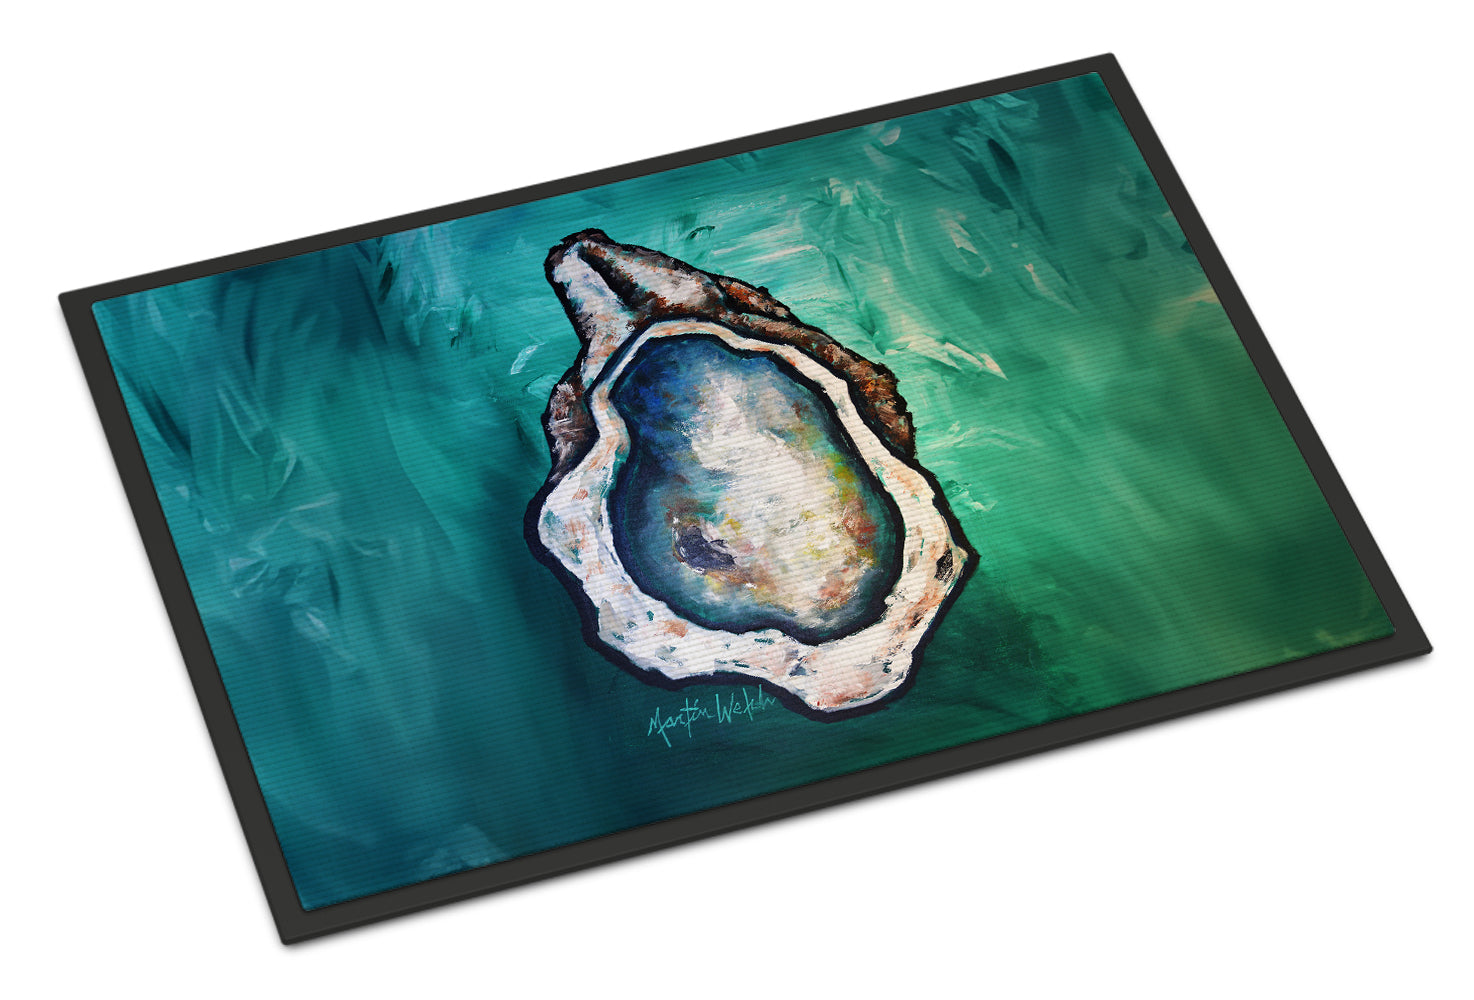 Buy this One Shell Oyster Doormat